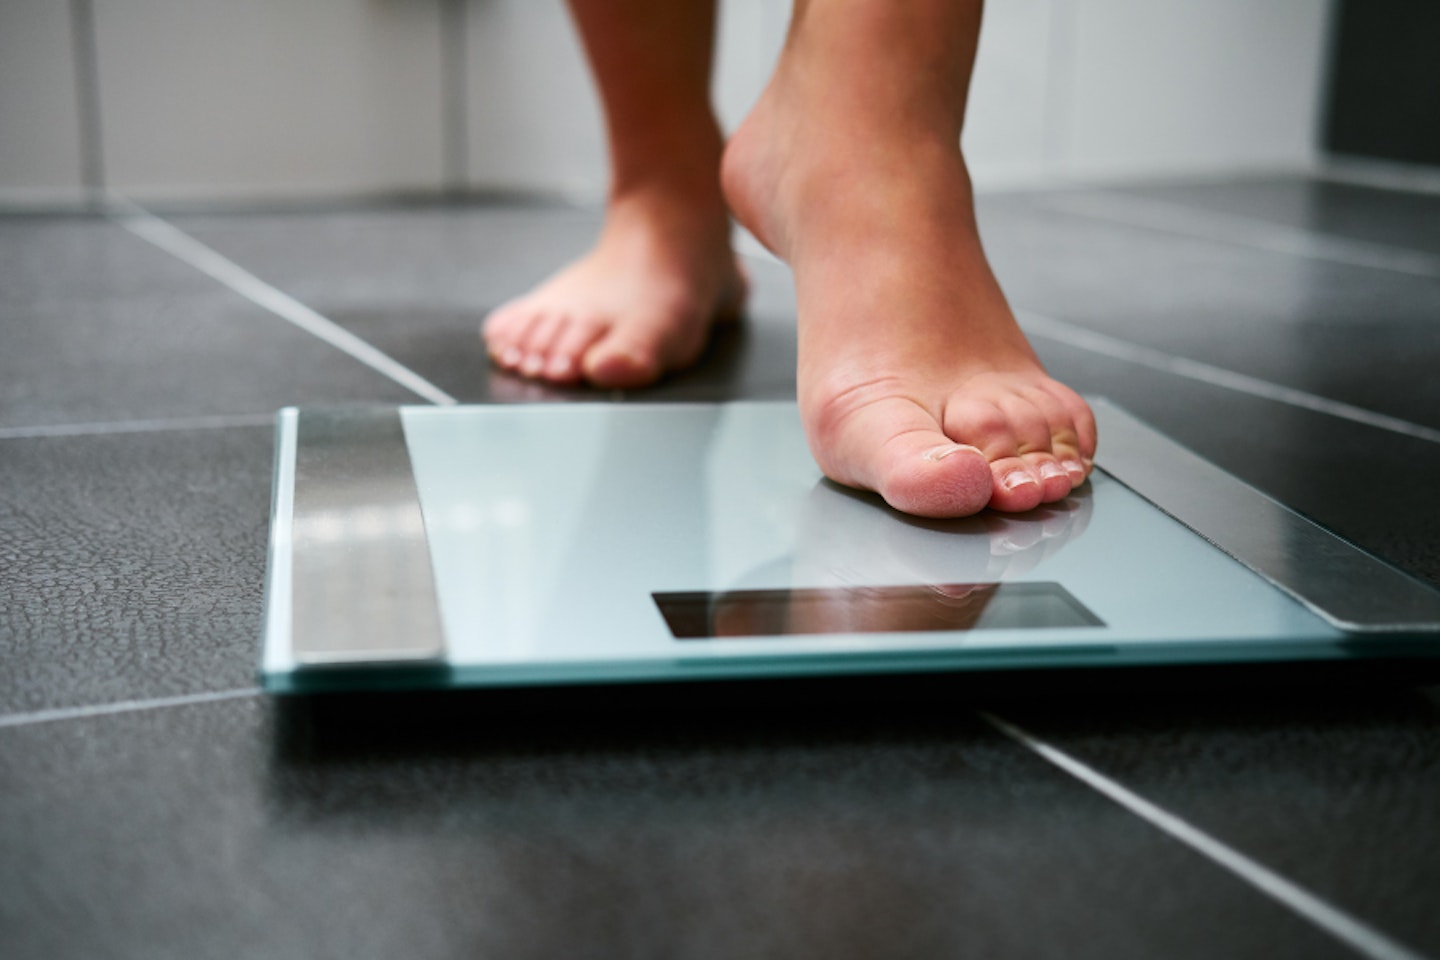 Keep Track of Your Weight With the Best Smart Scales